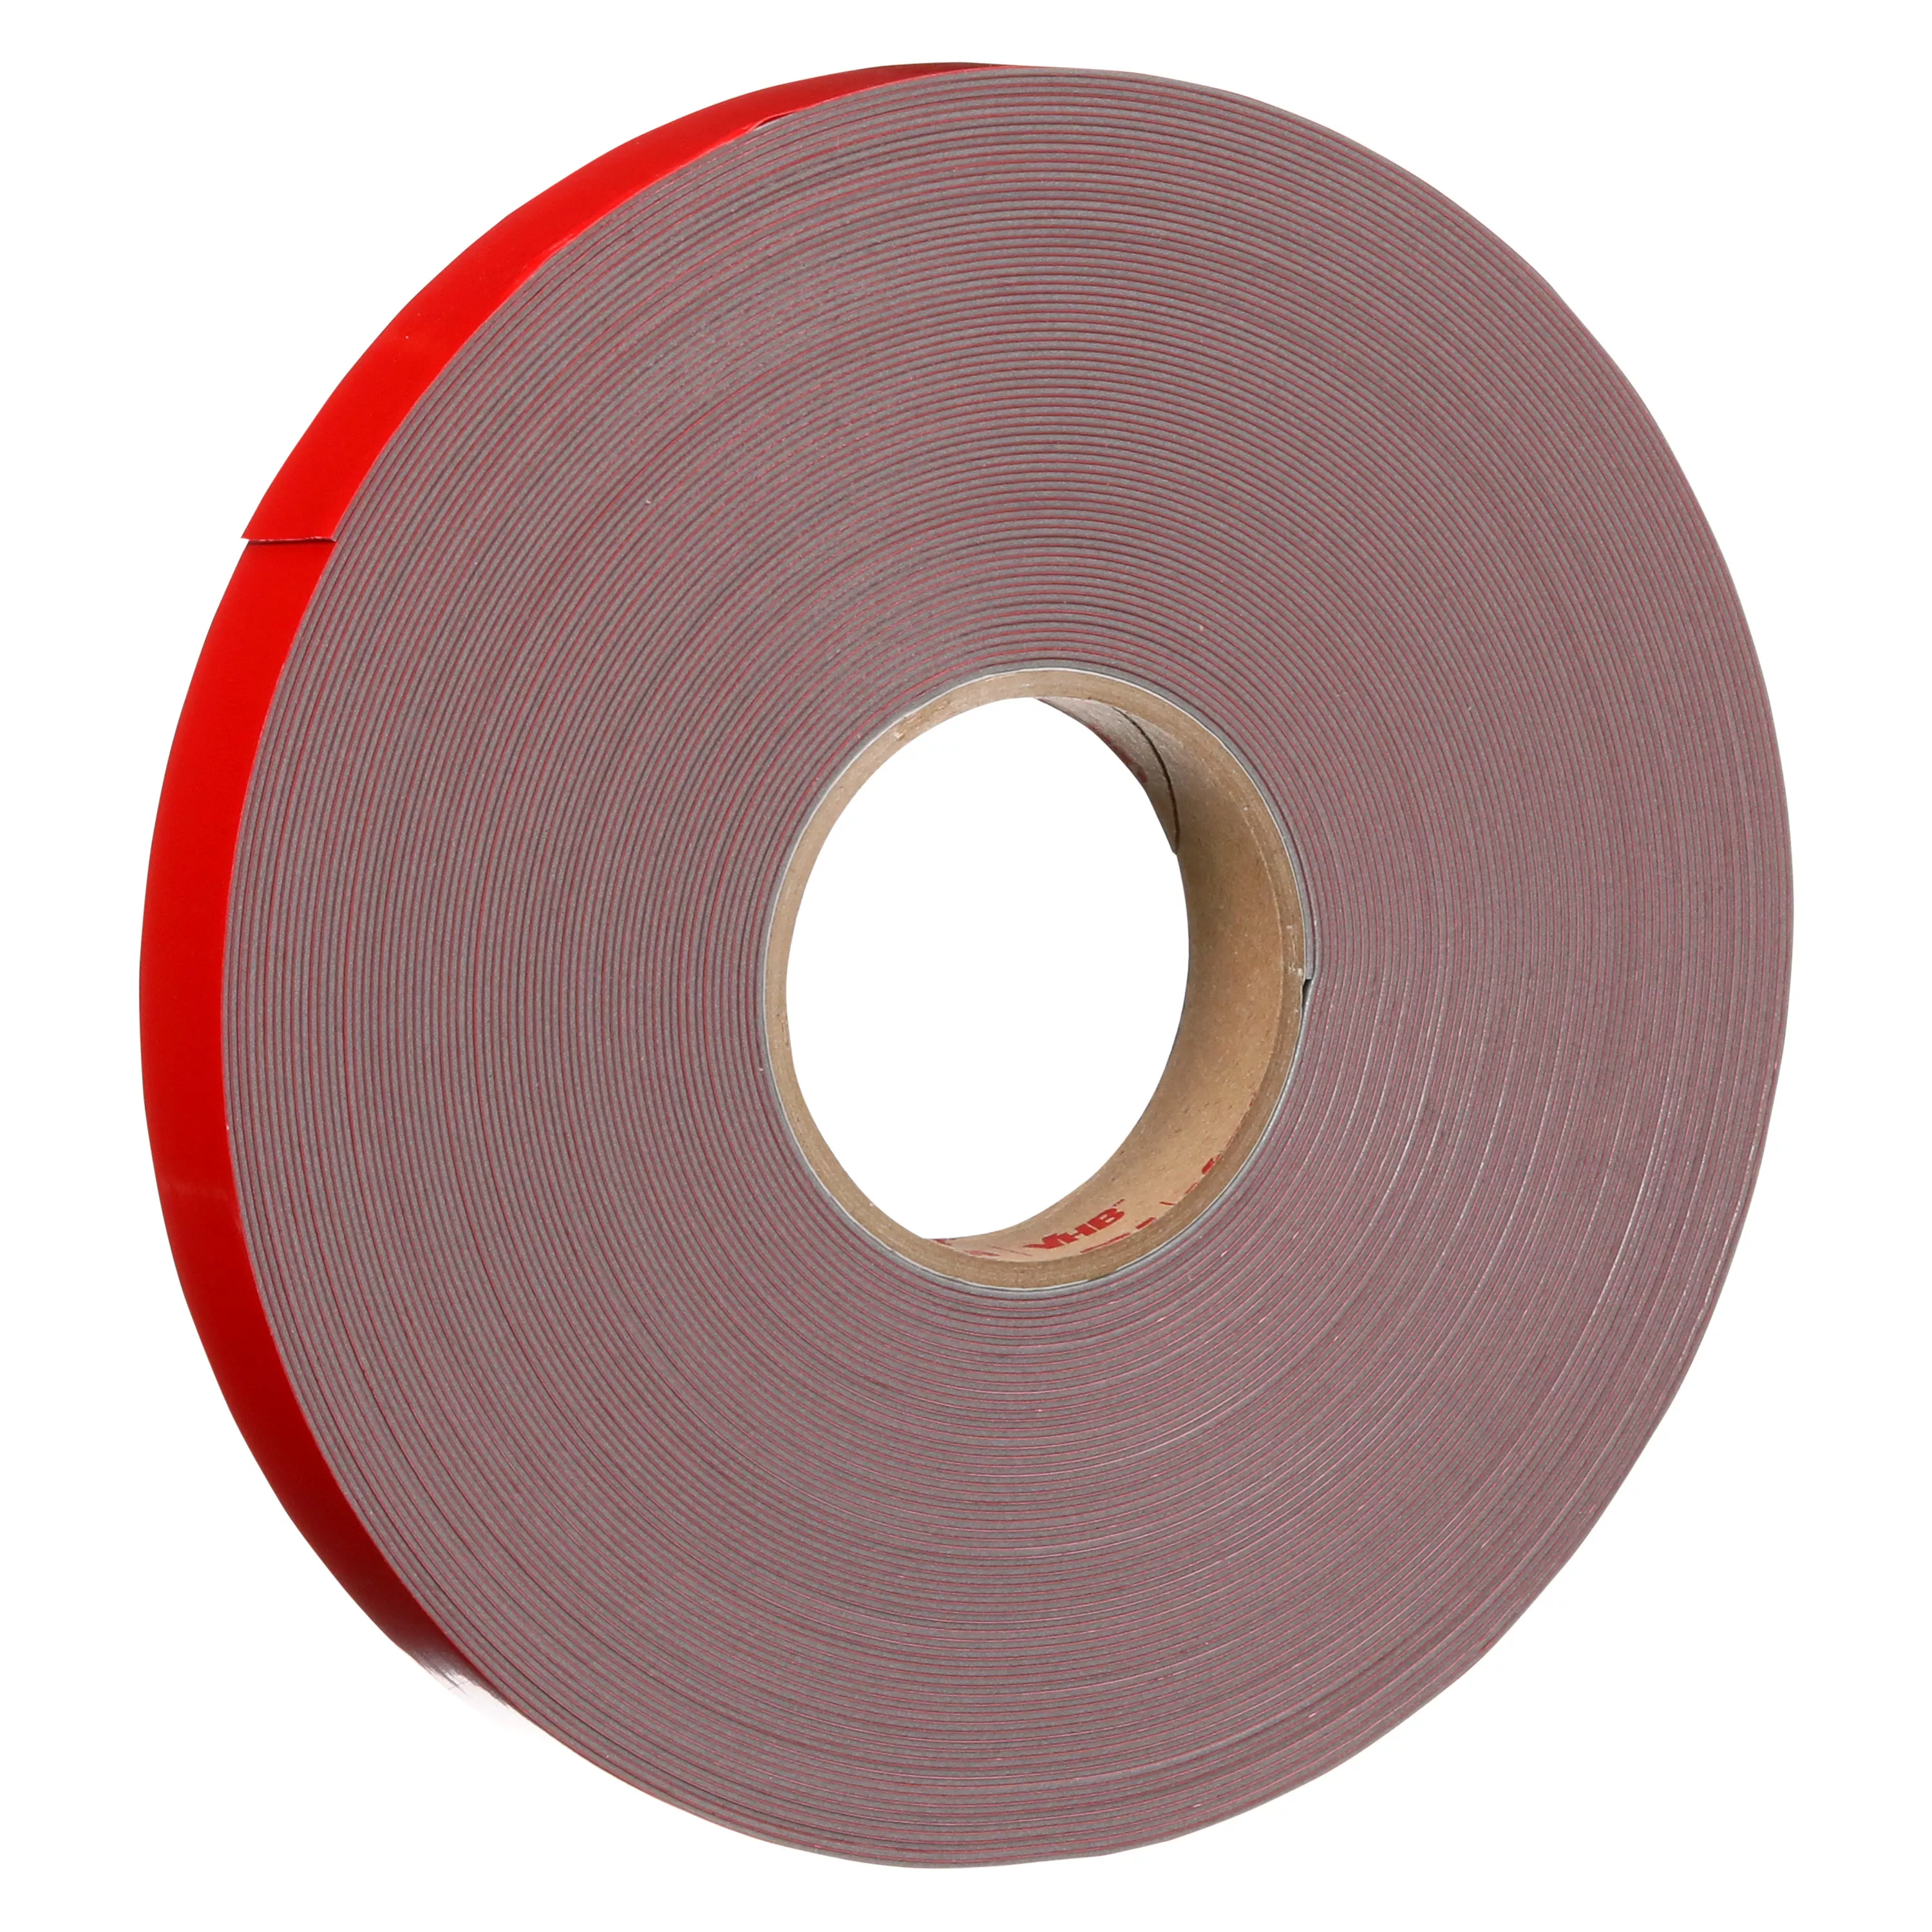 Product Number 4646 | 3M™ VHB™ Tape 4646